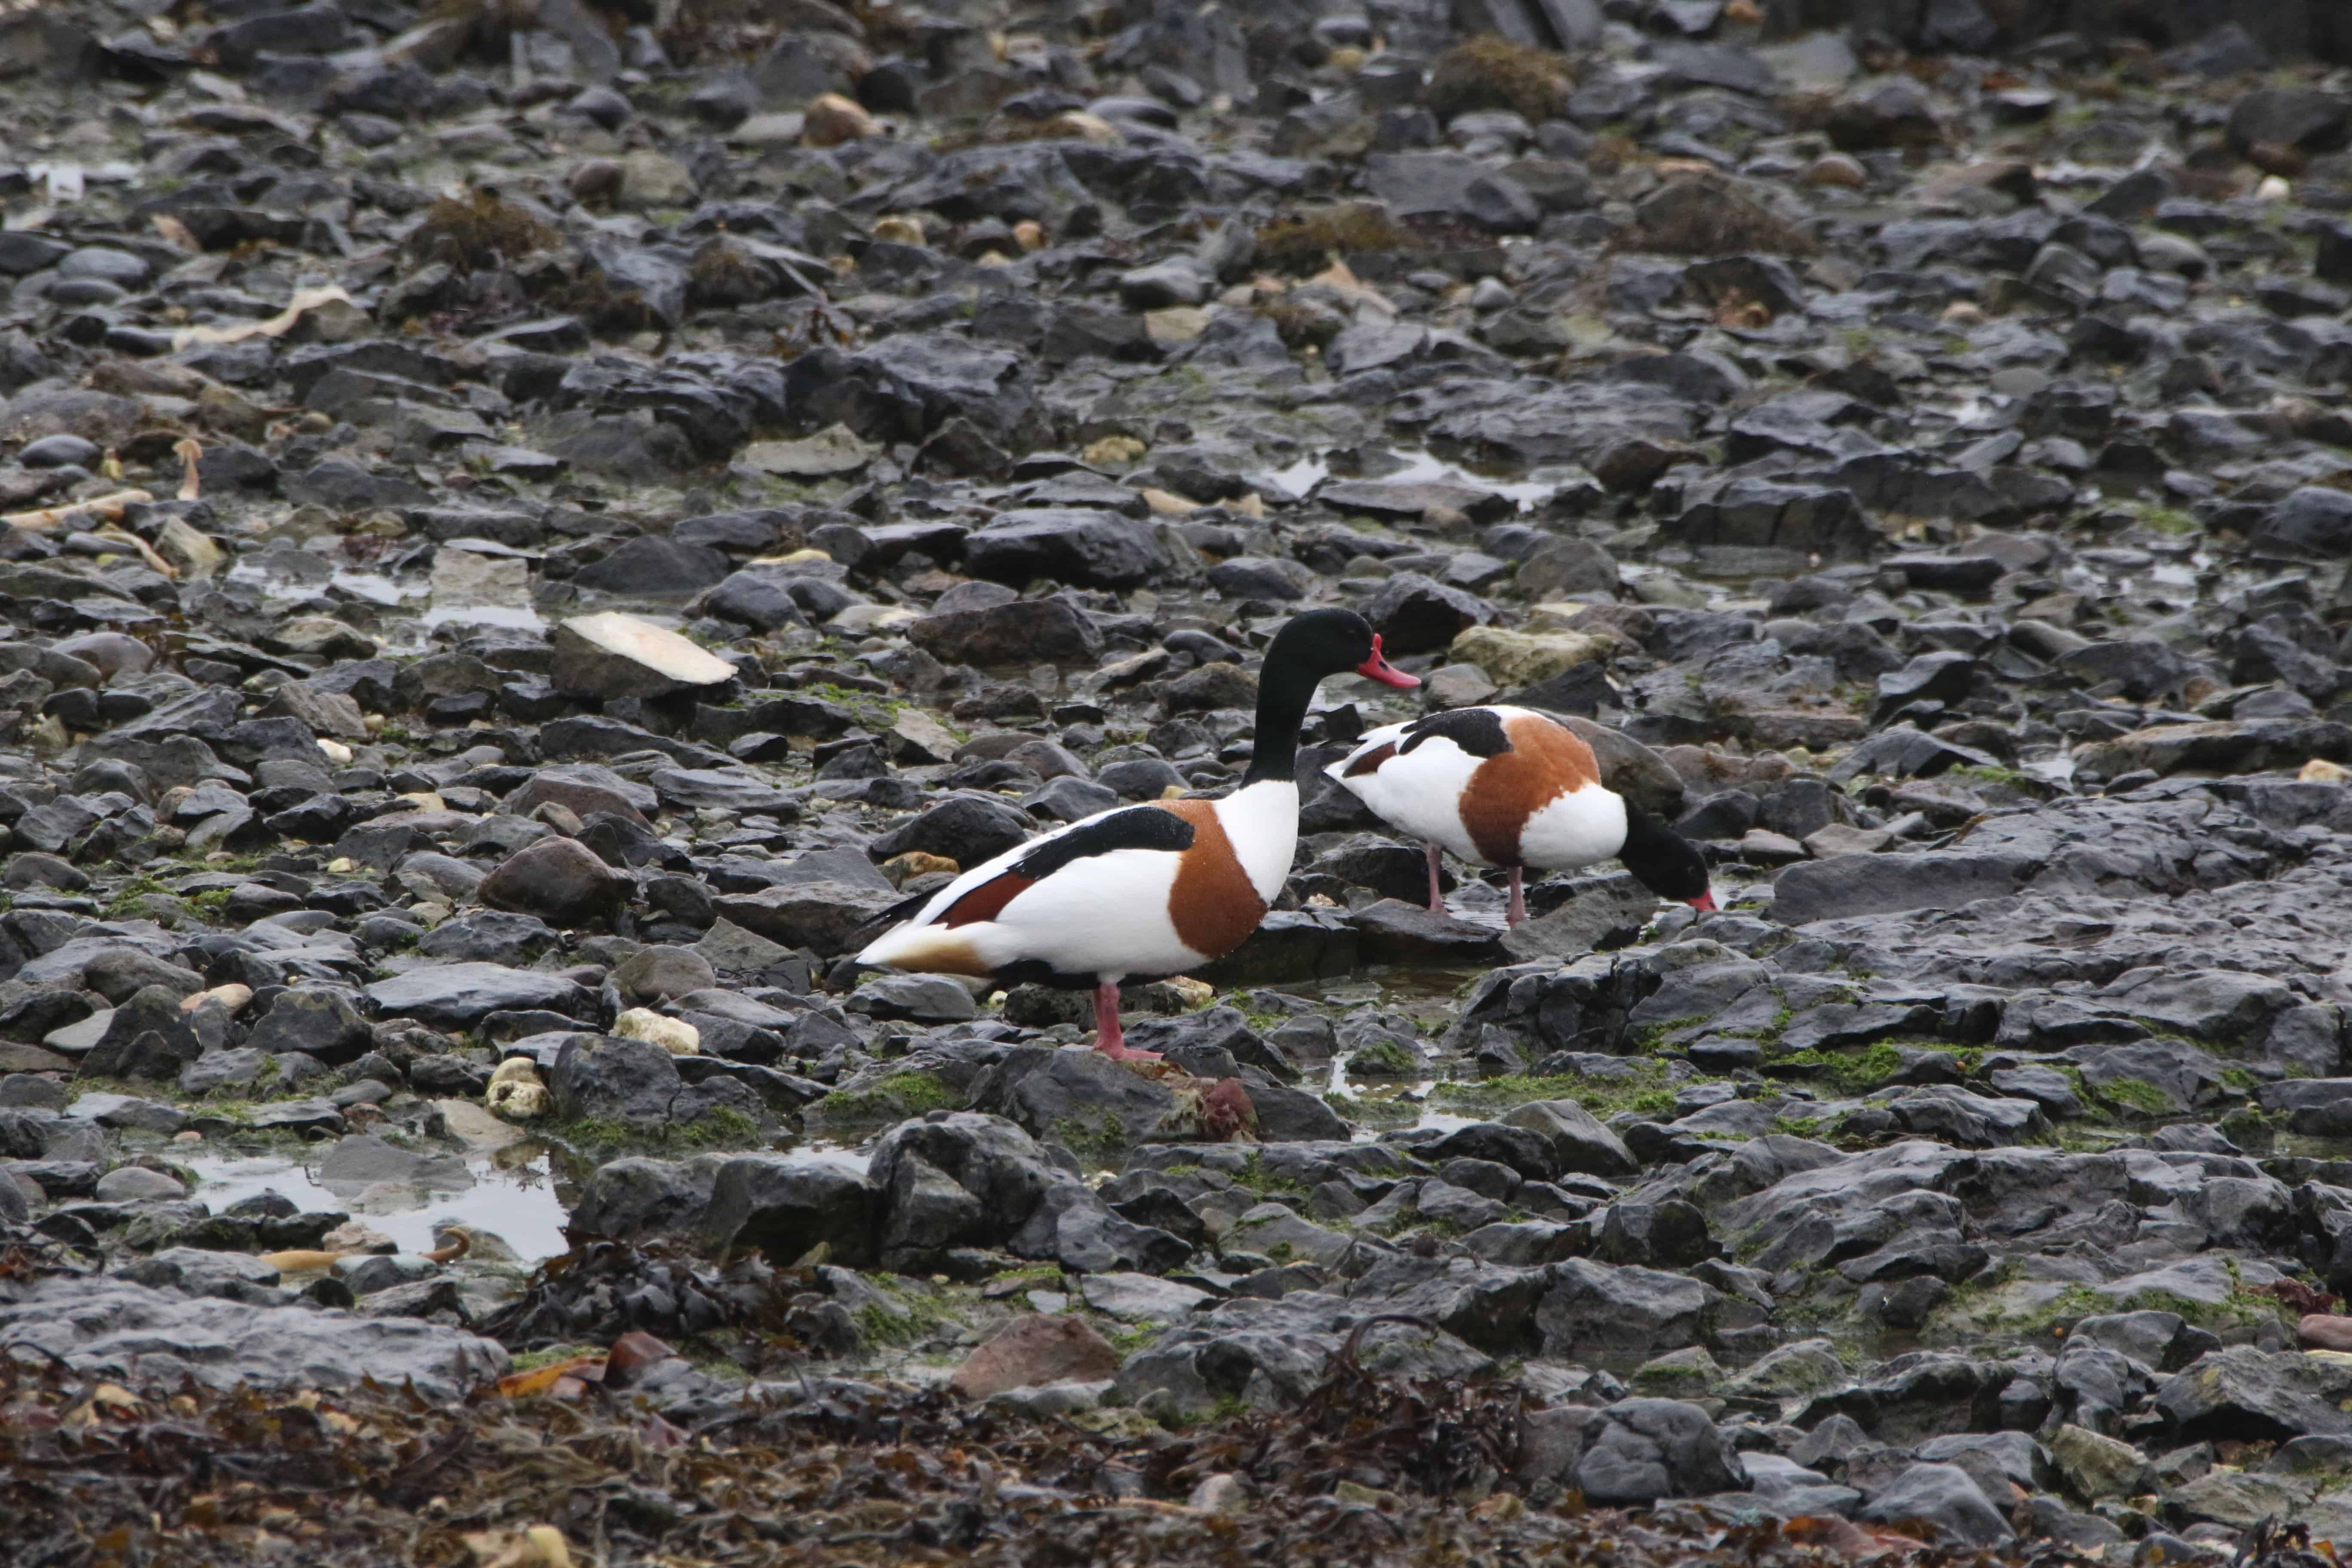 Male shelduck stands guard as his mate (who undertakes egg-production and incubation) feeds in the intertidal at Langness. Copyright: Dr Mike Pienkowski.